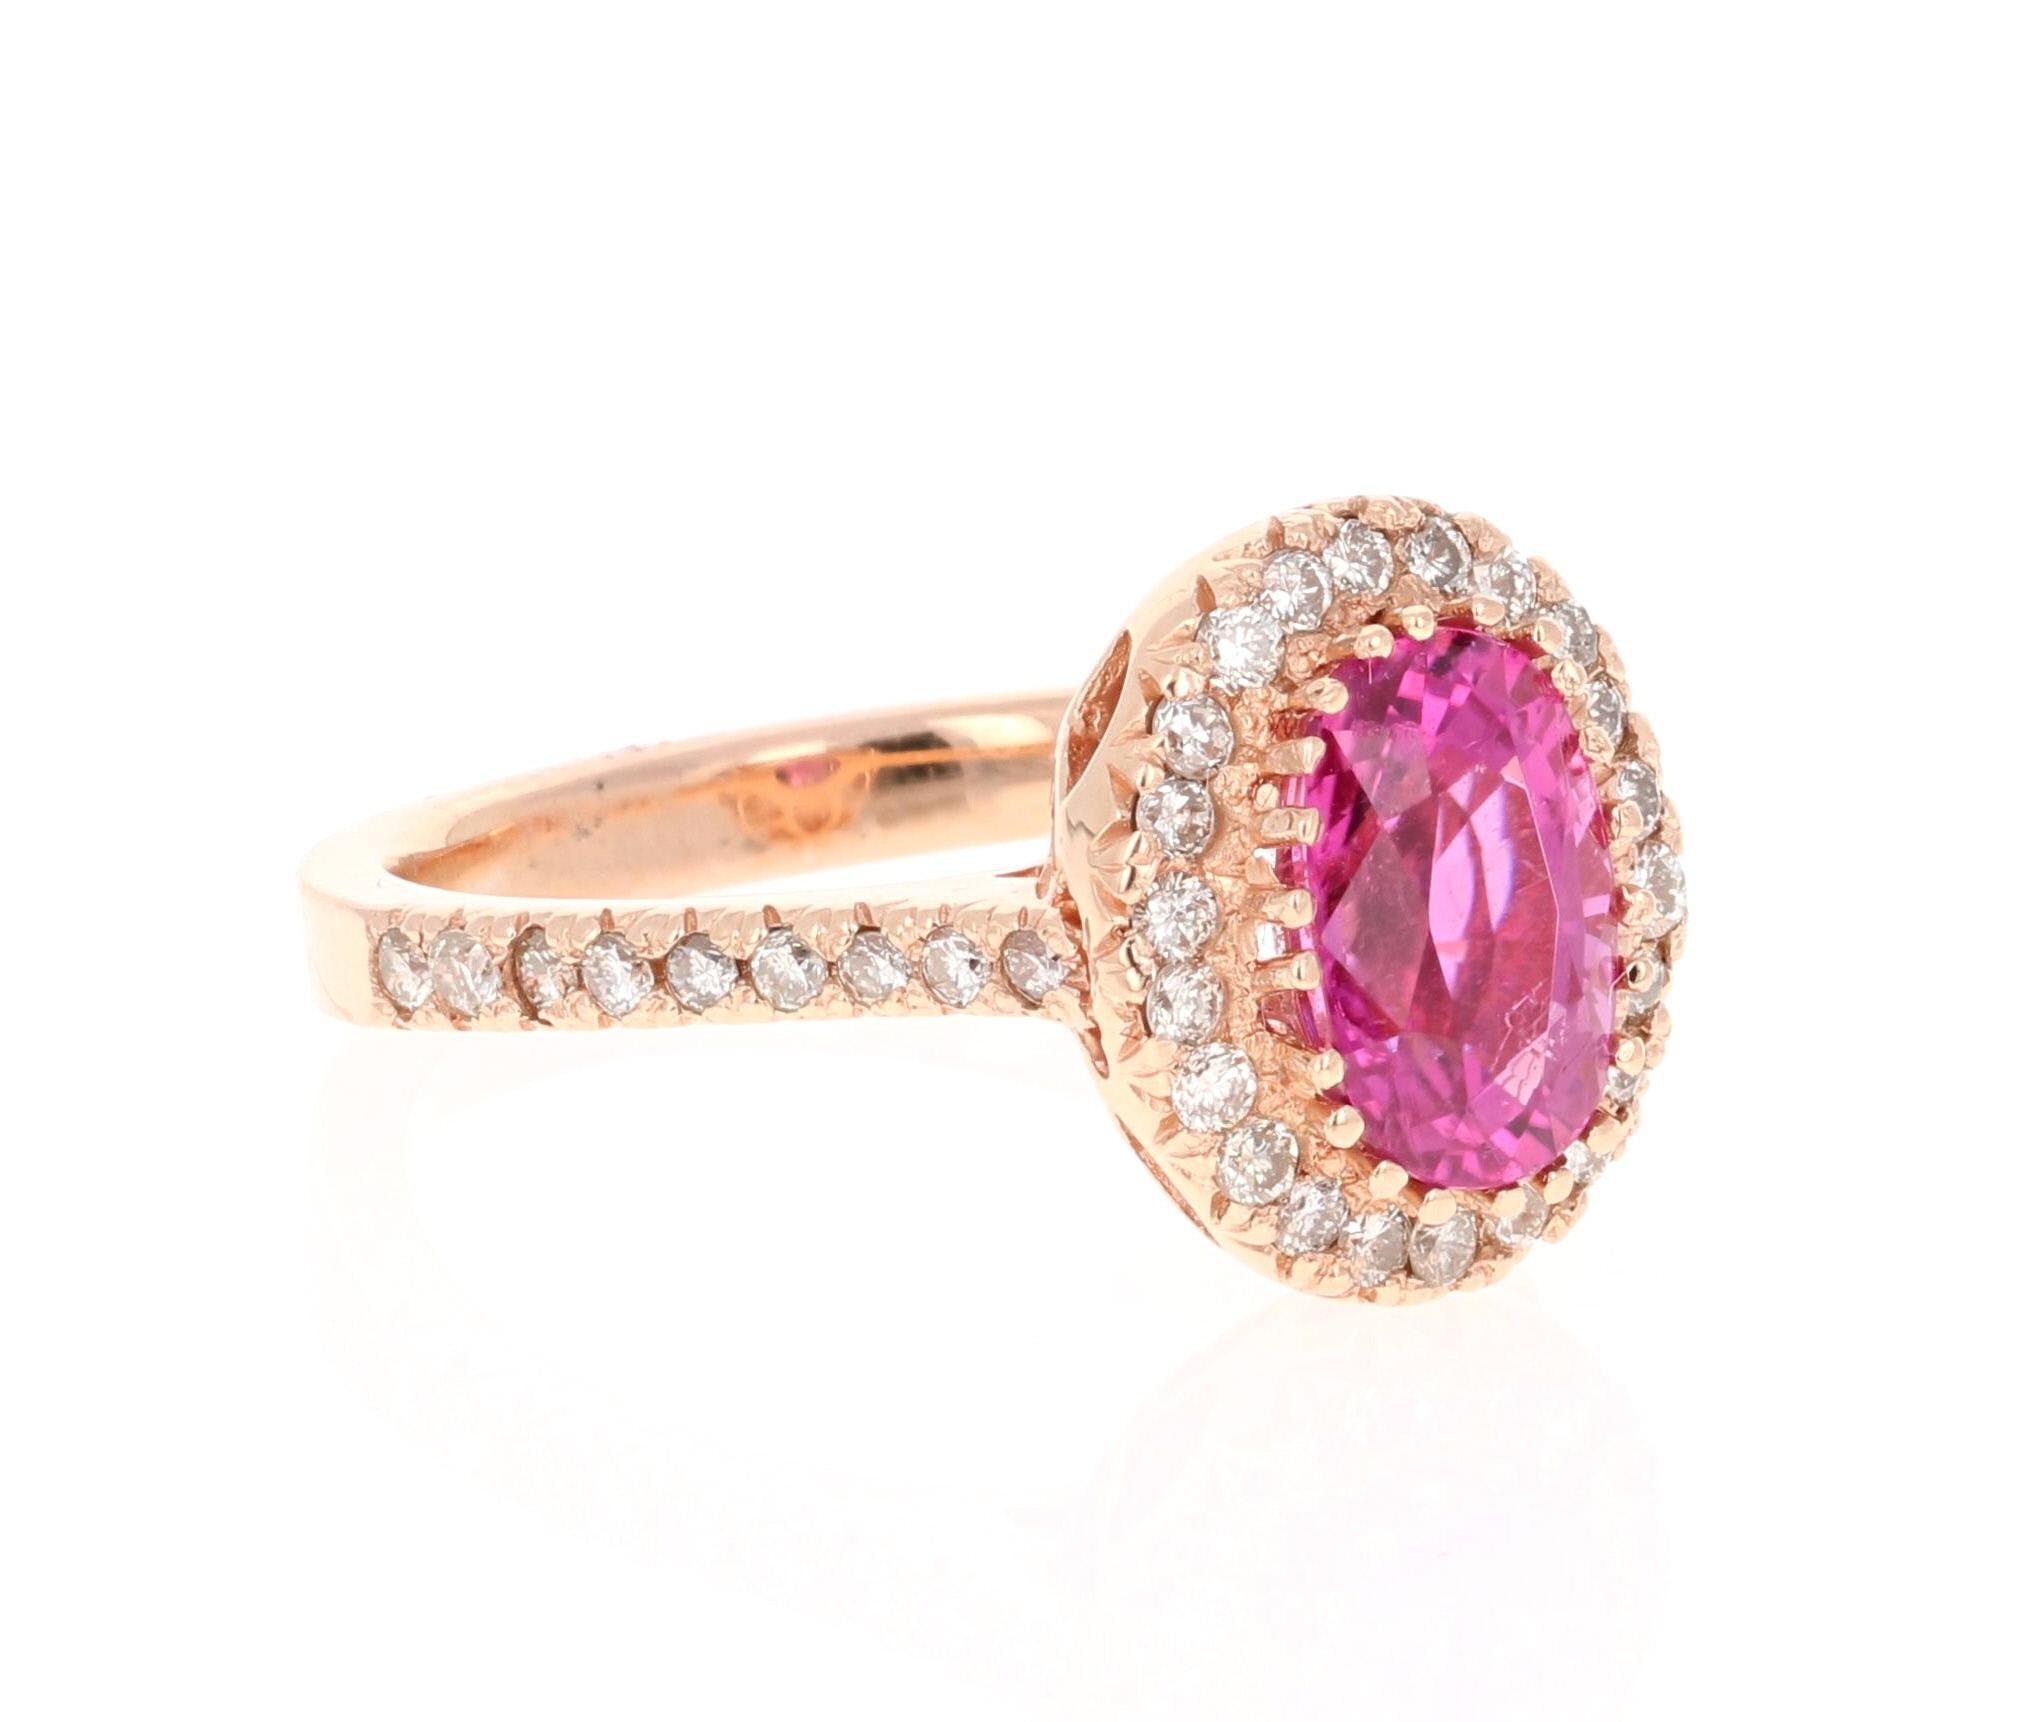 Wow! Beautiful and Blazing - Hot Pink Tourmaline Diamond Ring!

This ring has an Oval Cut Hot Pink Tourmaline that weighs 2.08 Carats. Floating around the tourmaline are 38 Round Cut Diamonds weighing 0.54 Carats. The total carat weight of the ring